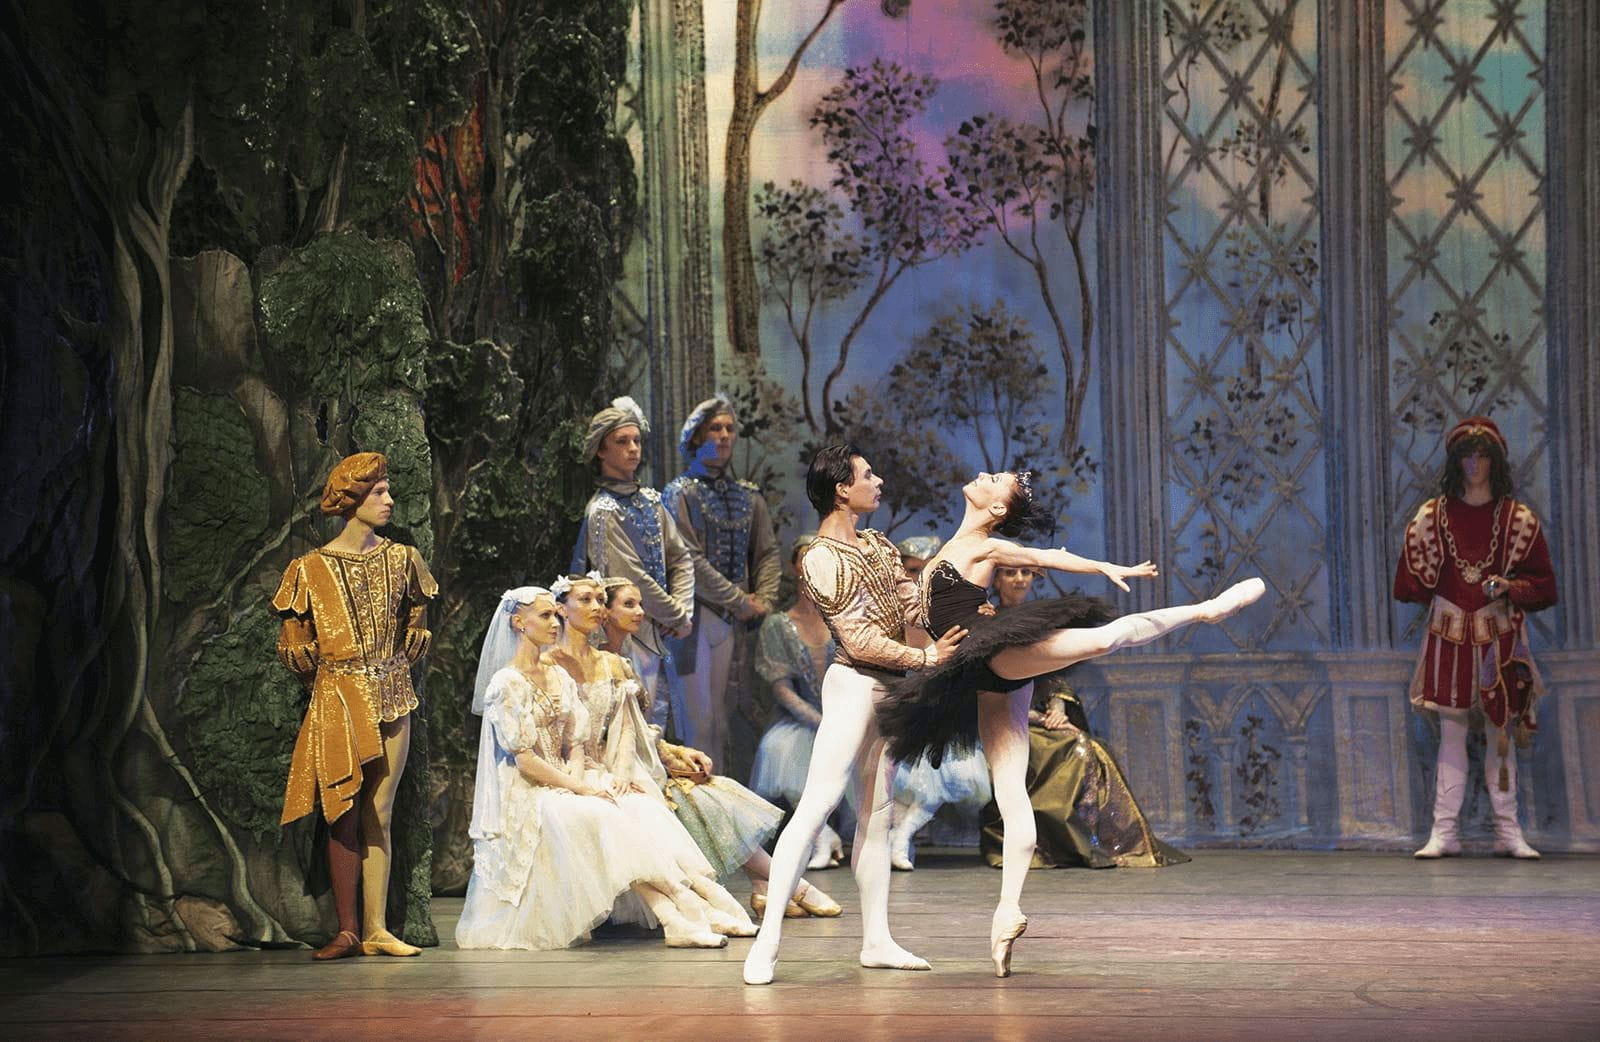 The Russian National Ballet performs the grand reception scene from Swan Lake, where Siegfried is fooled by Odile